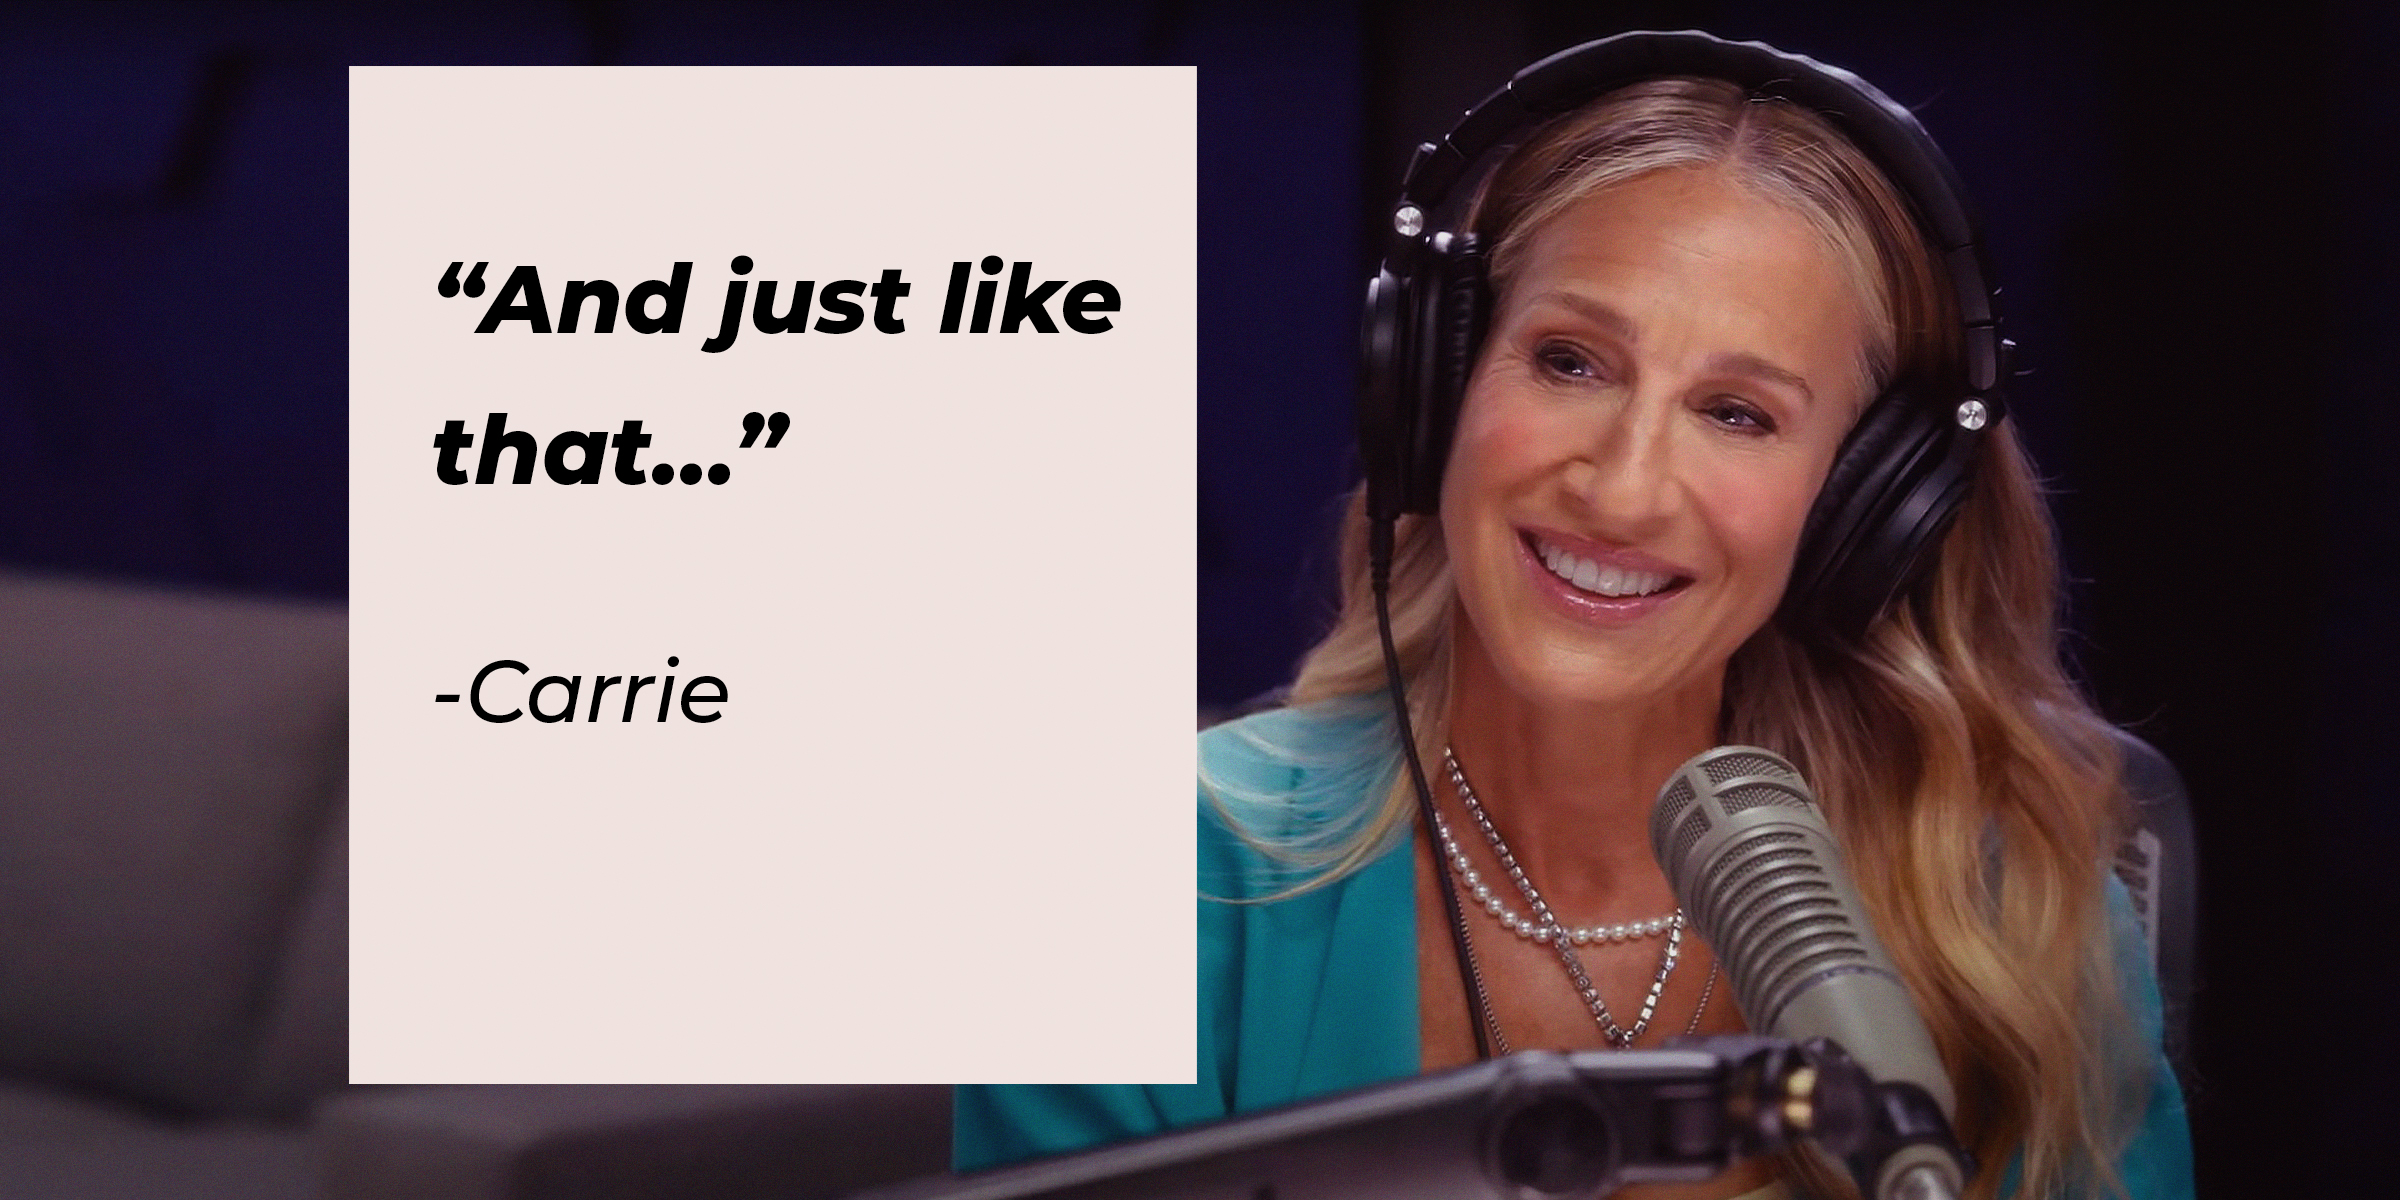 An image of Carrie with her quote: “And just like that…” | Source facebook.com/justlikethatmax